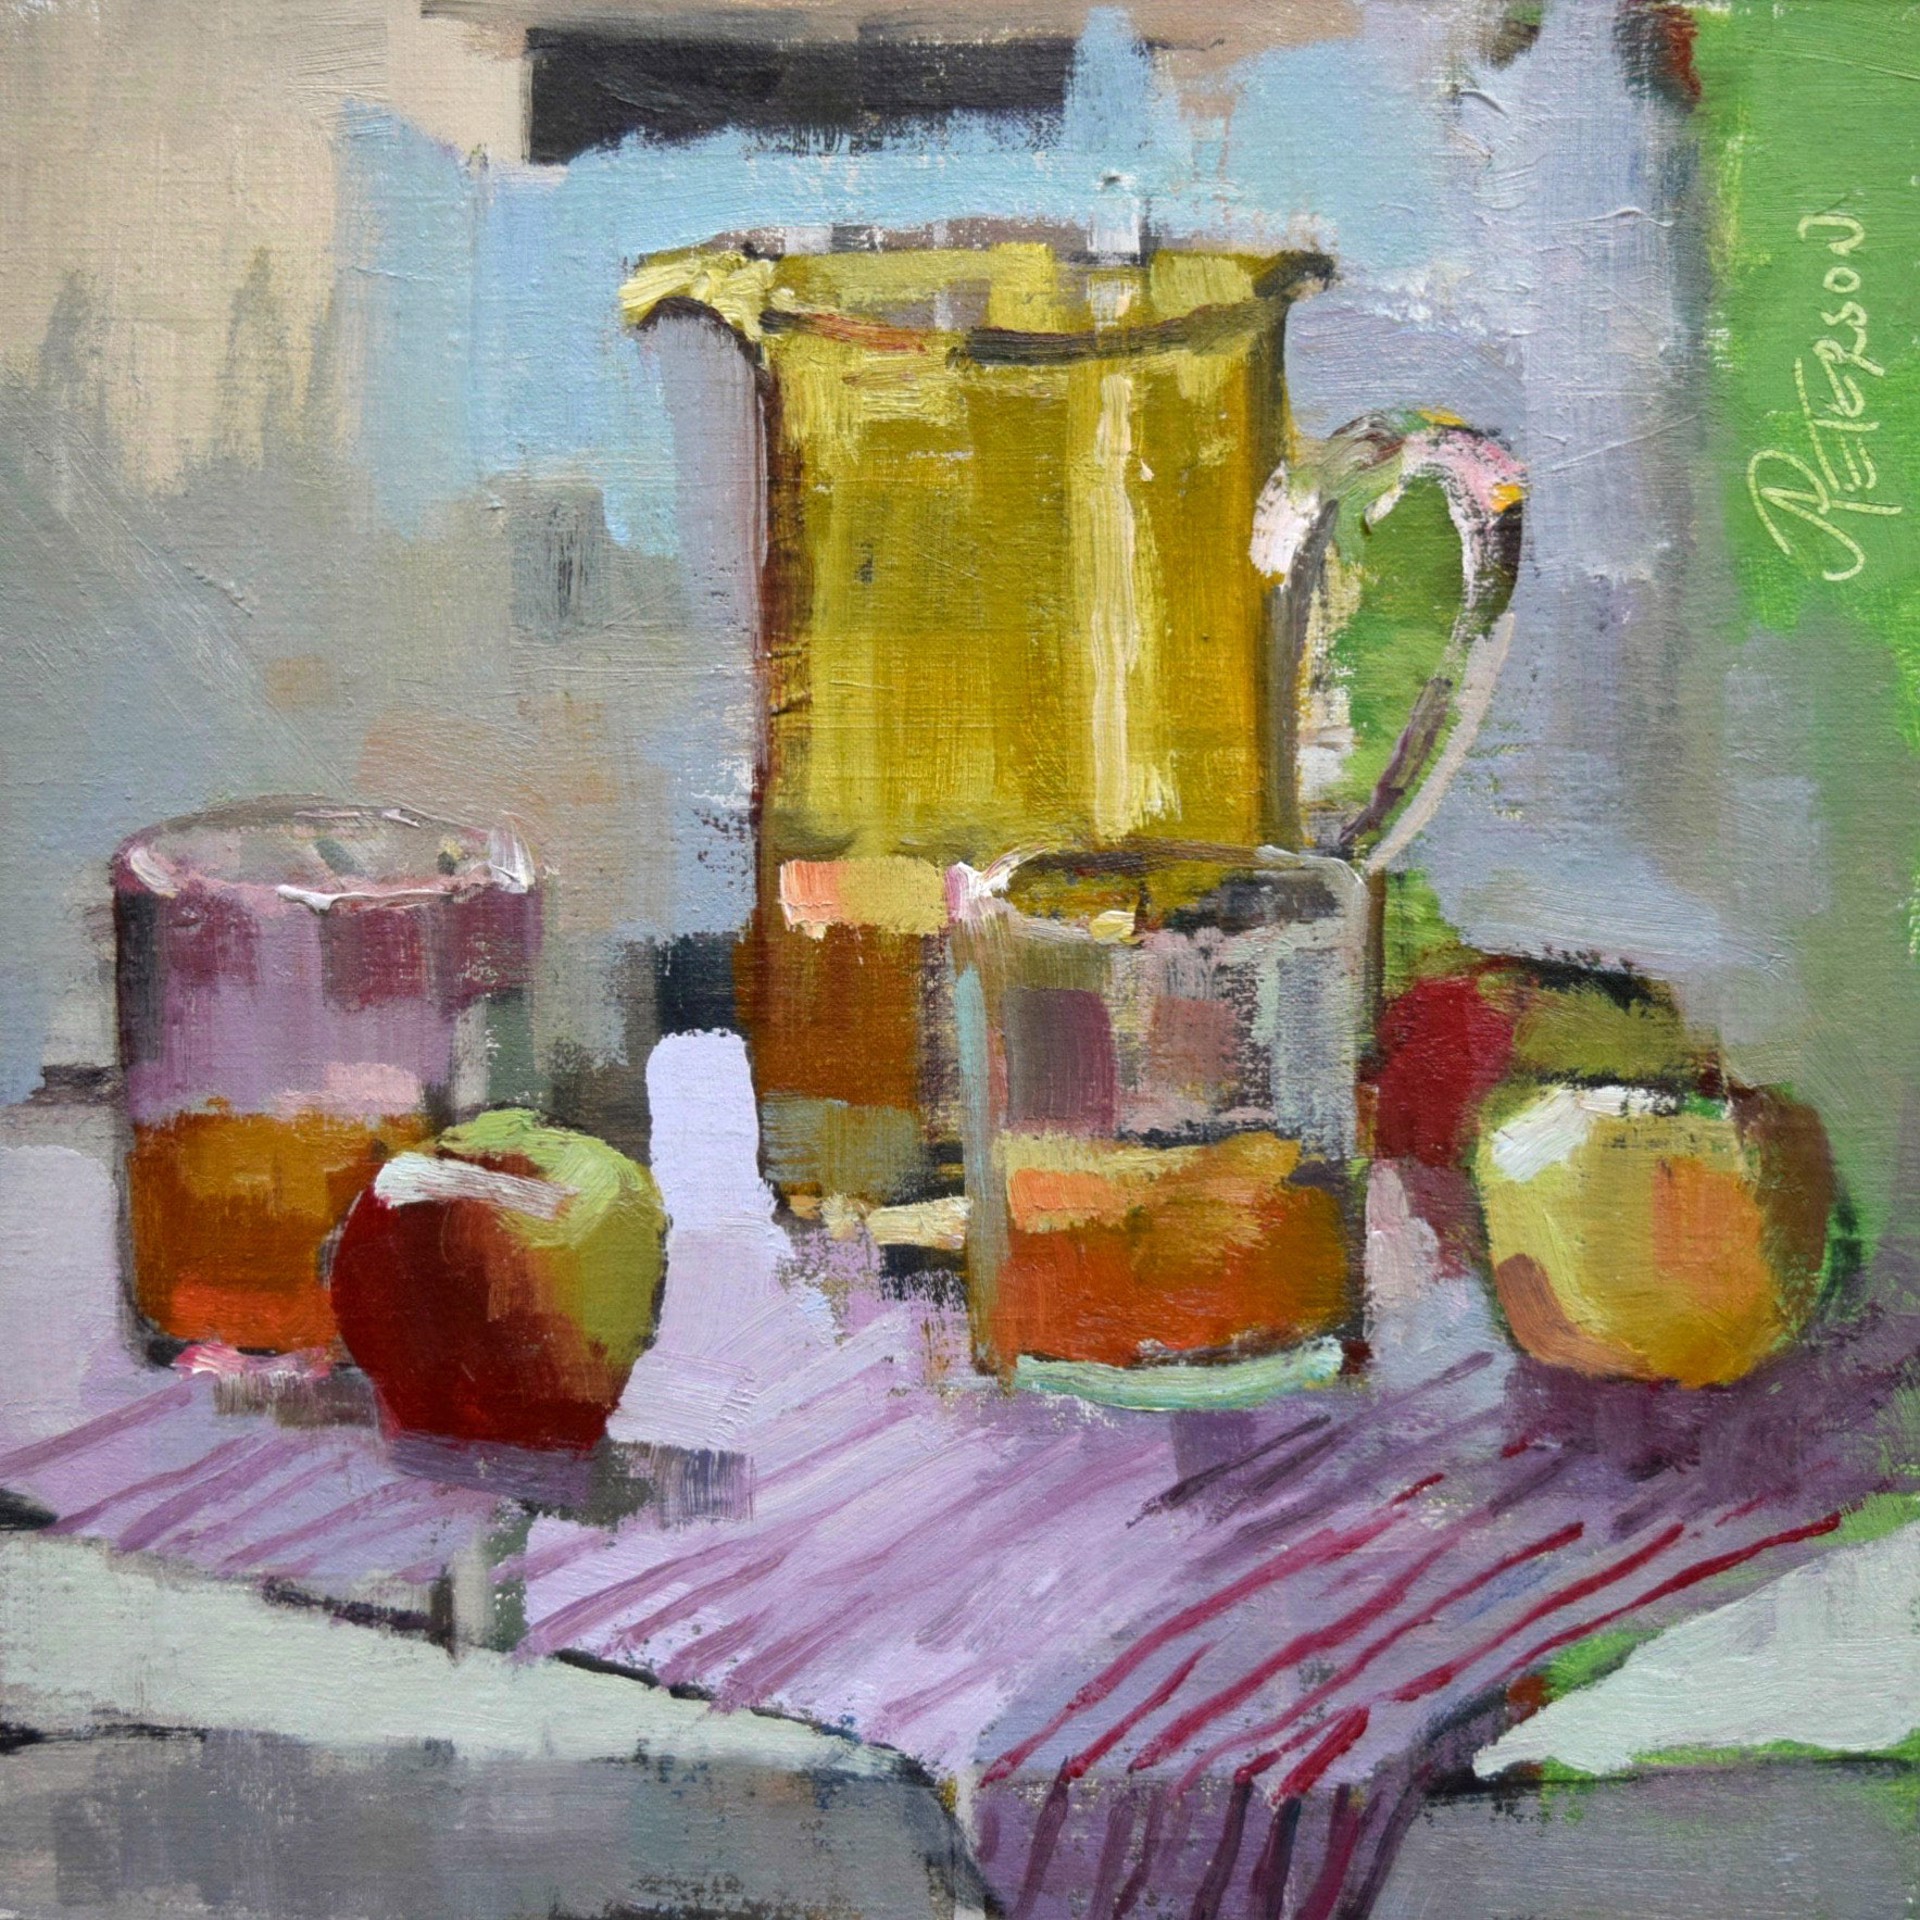 Pitcher and Apples by Amy R. Peterson